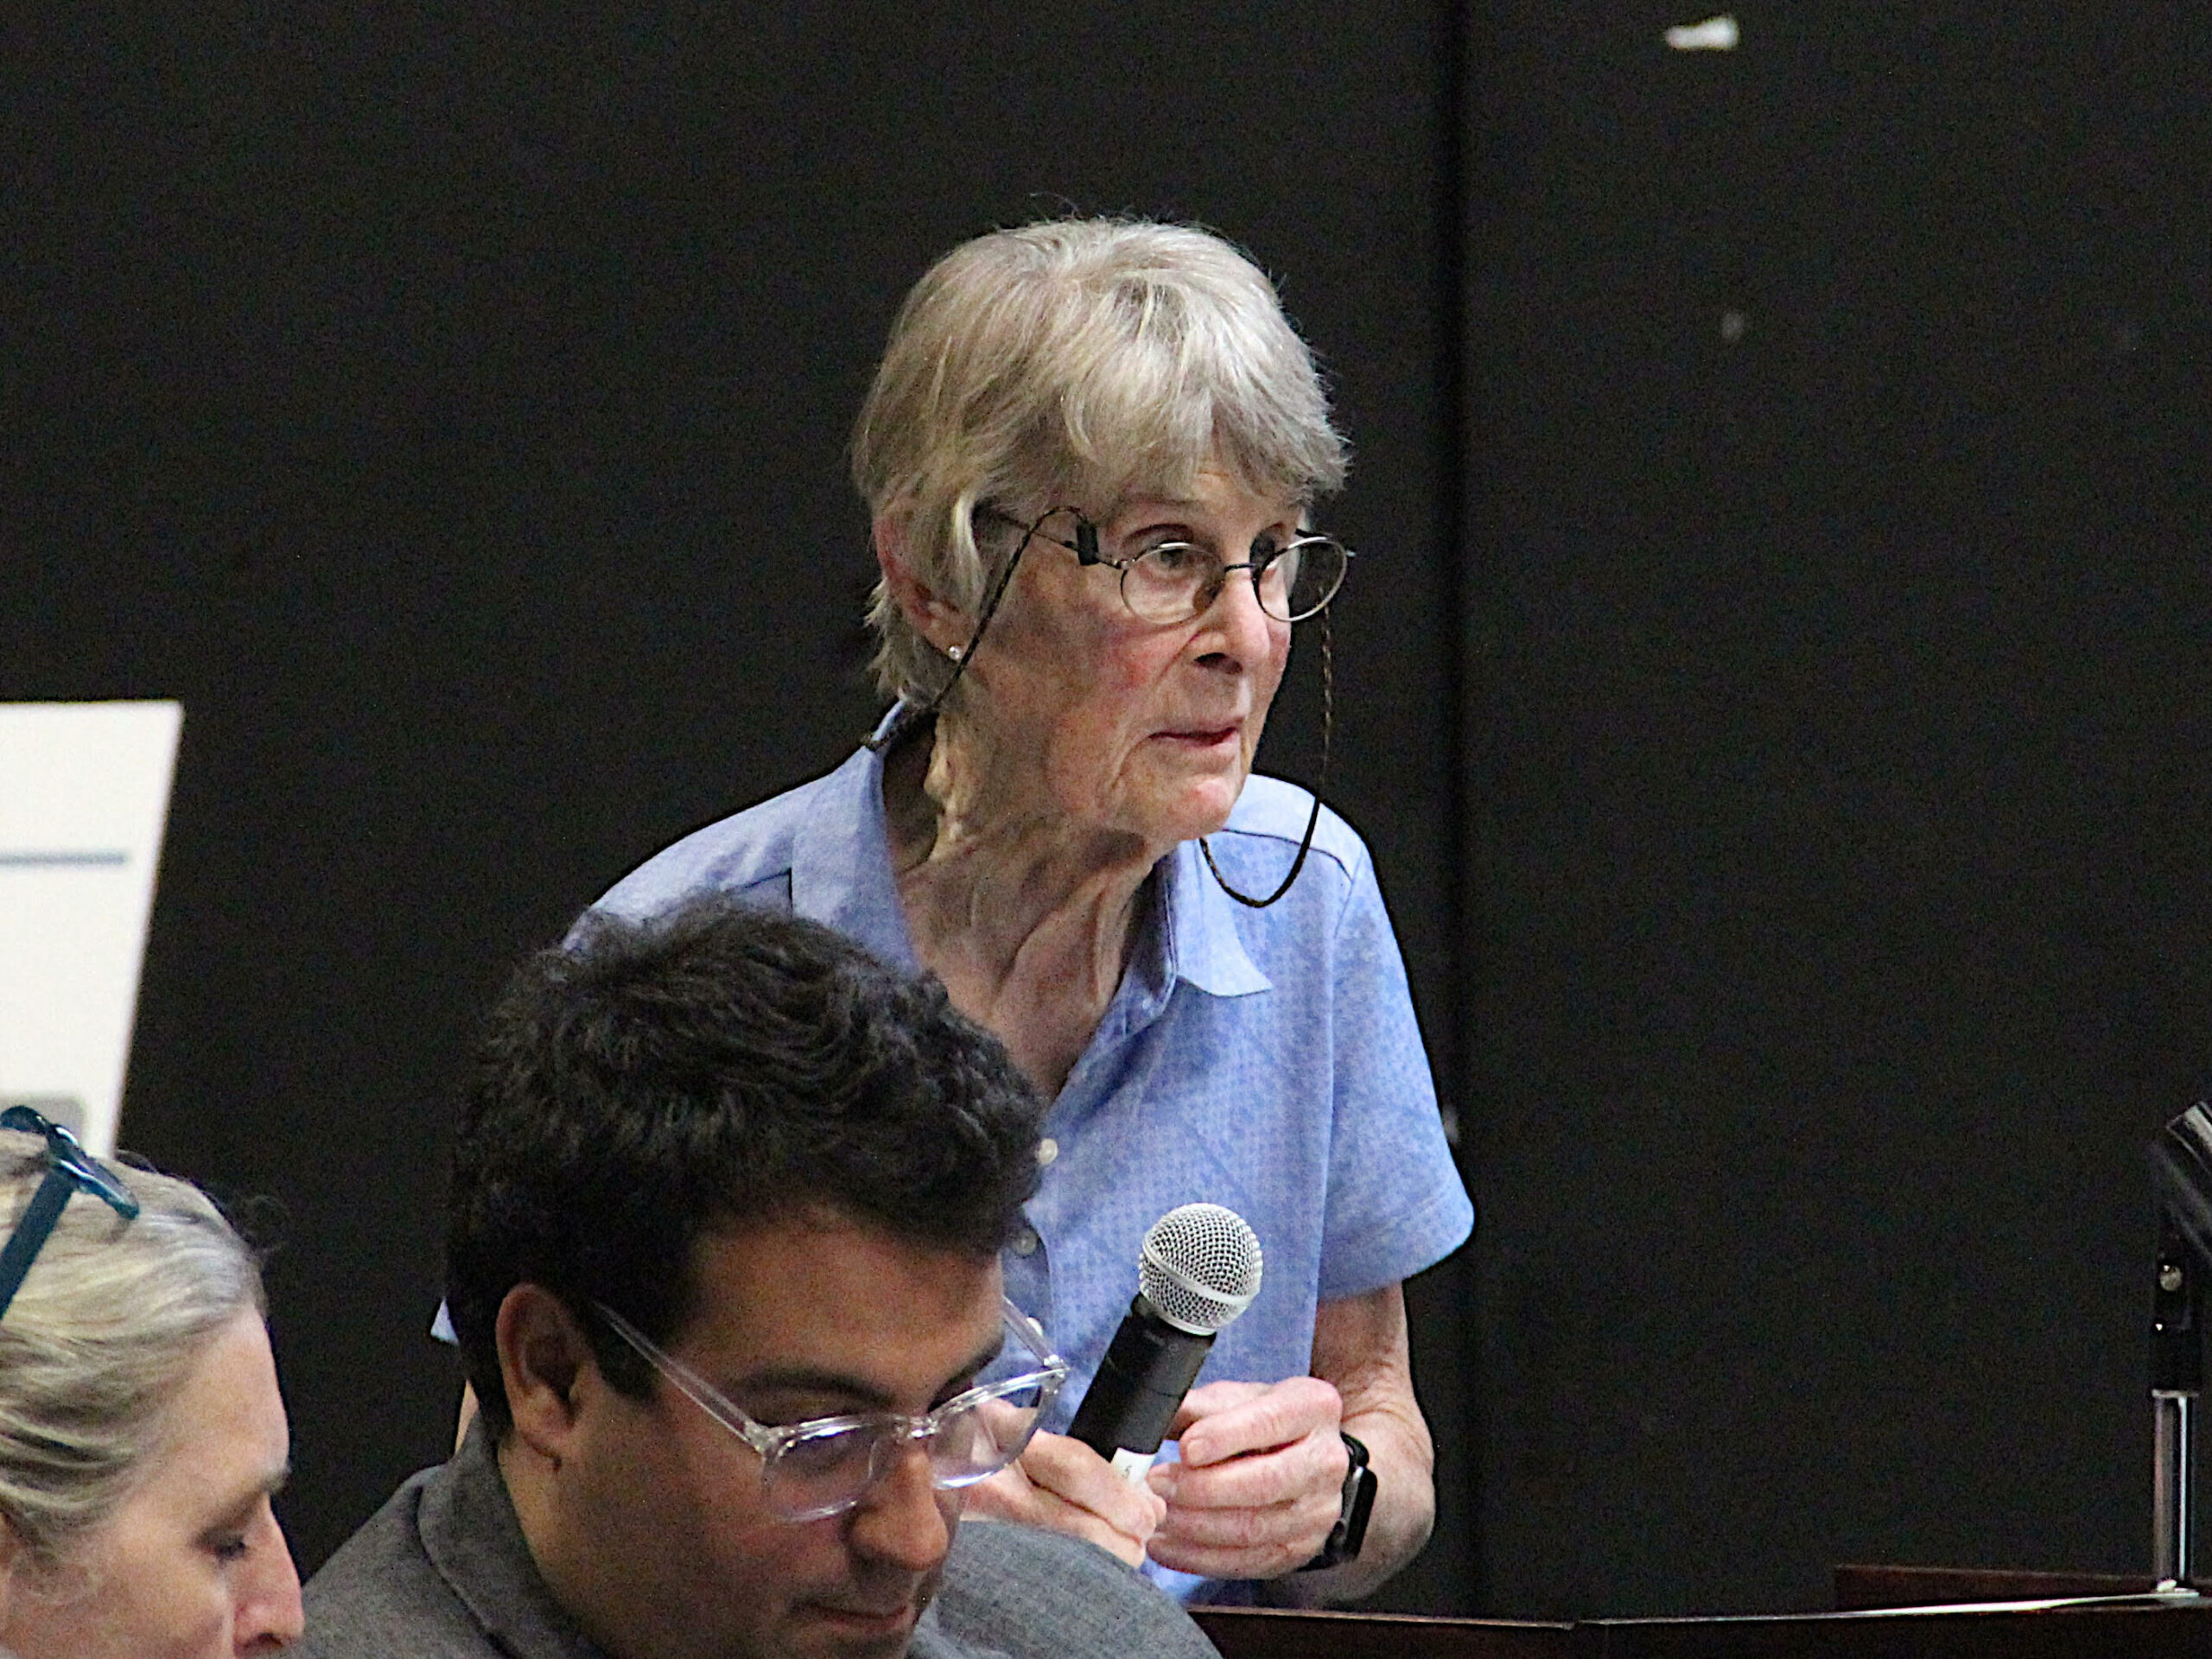 Bridgehampton resident Julie Burmeister said horizontal directional drilling may be a good way to lay cable under a paved road, but could cause irreparable harm to the Long Pond Greenbelt. KYRIL BROMLEY